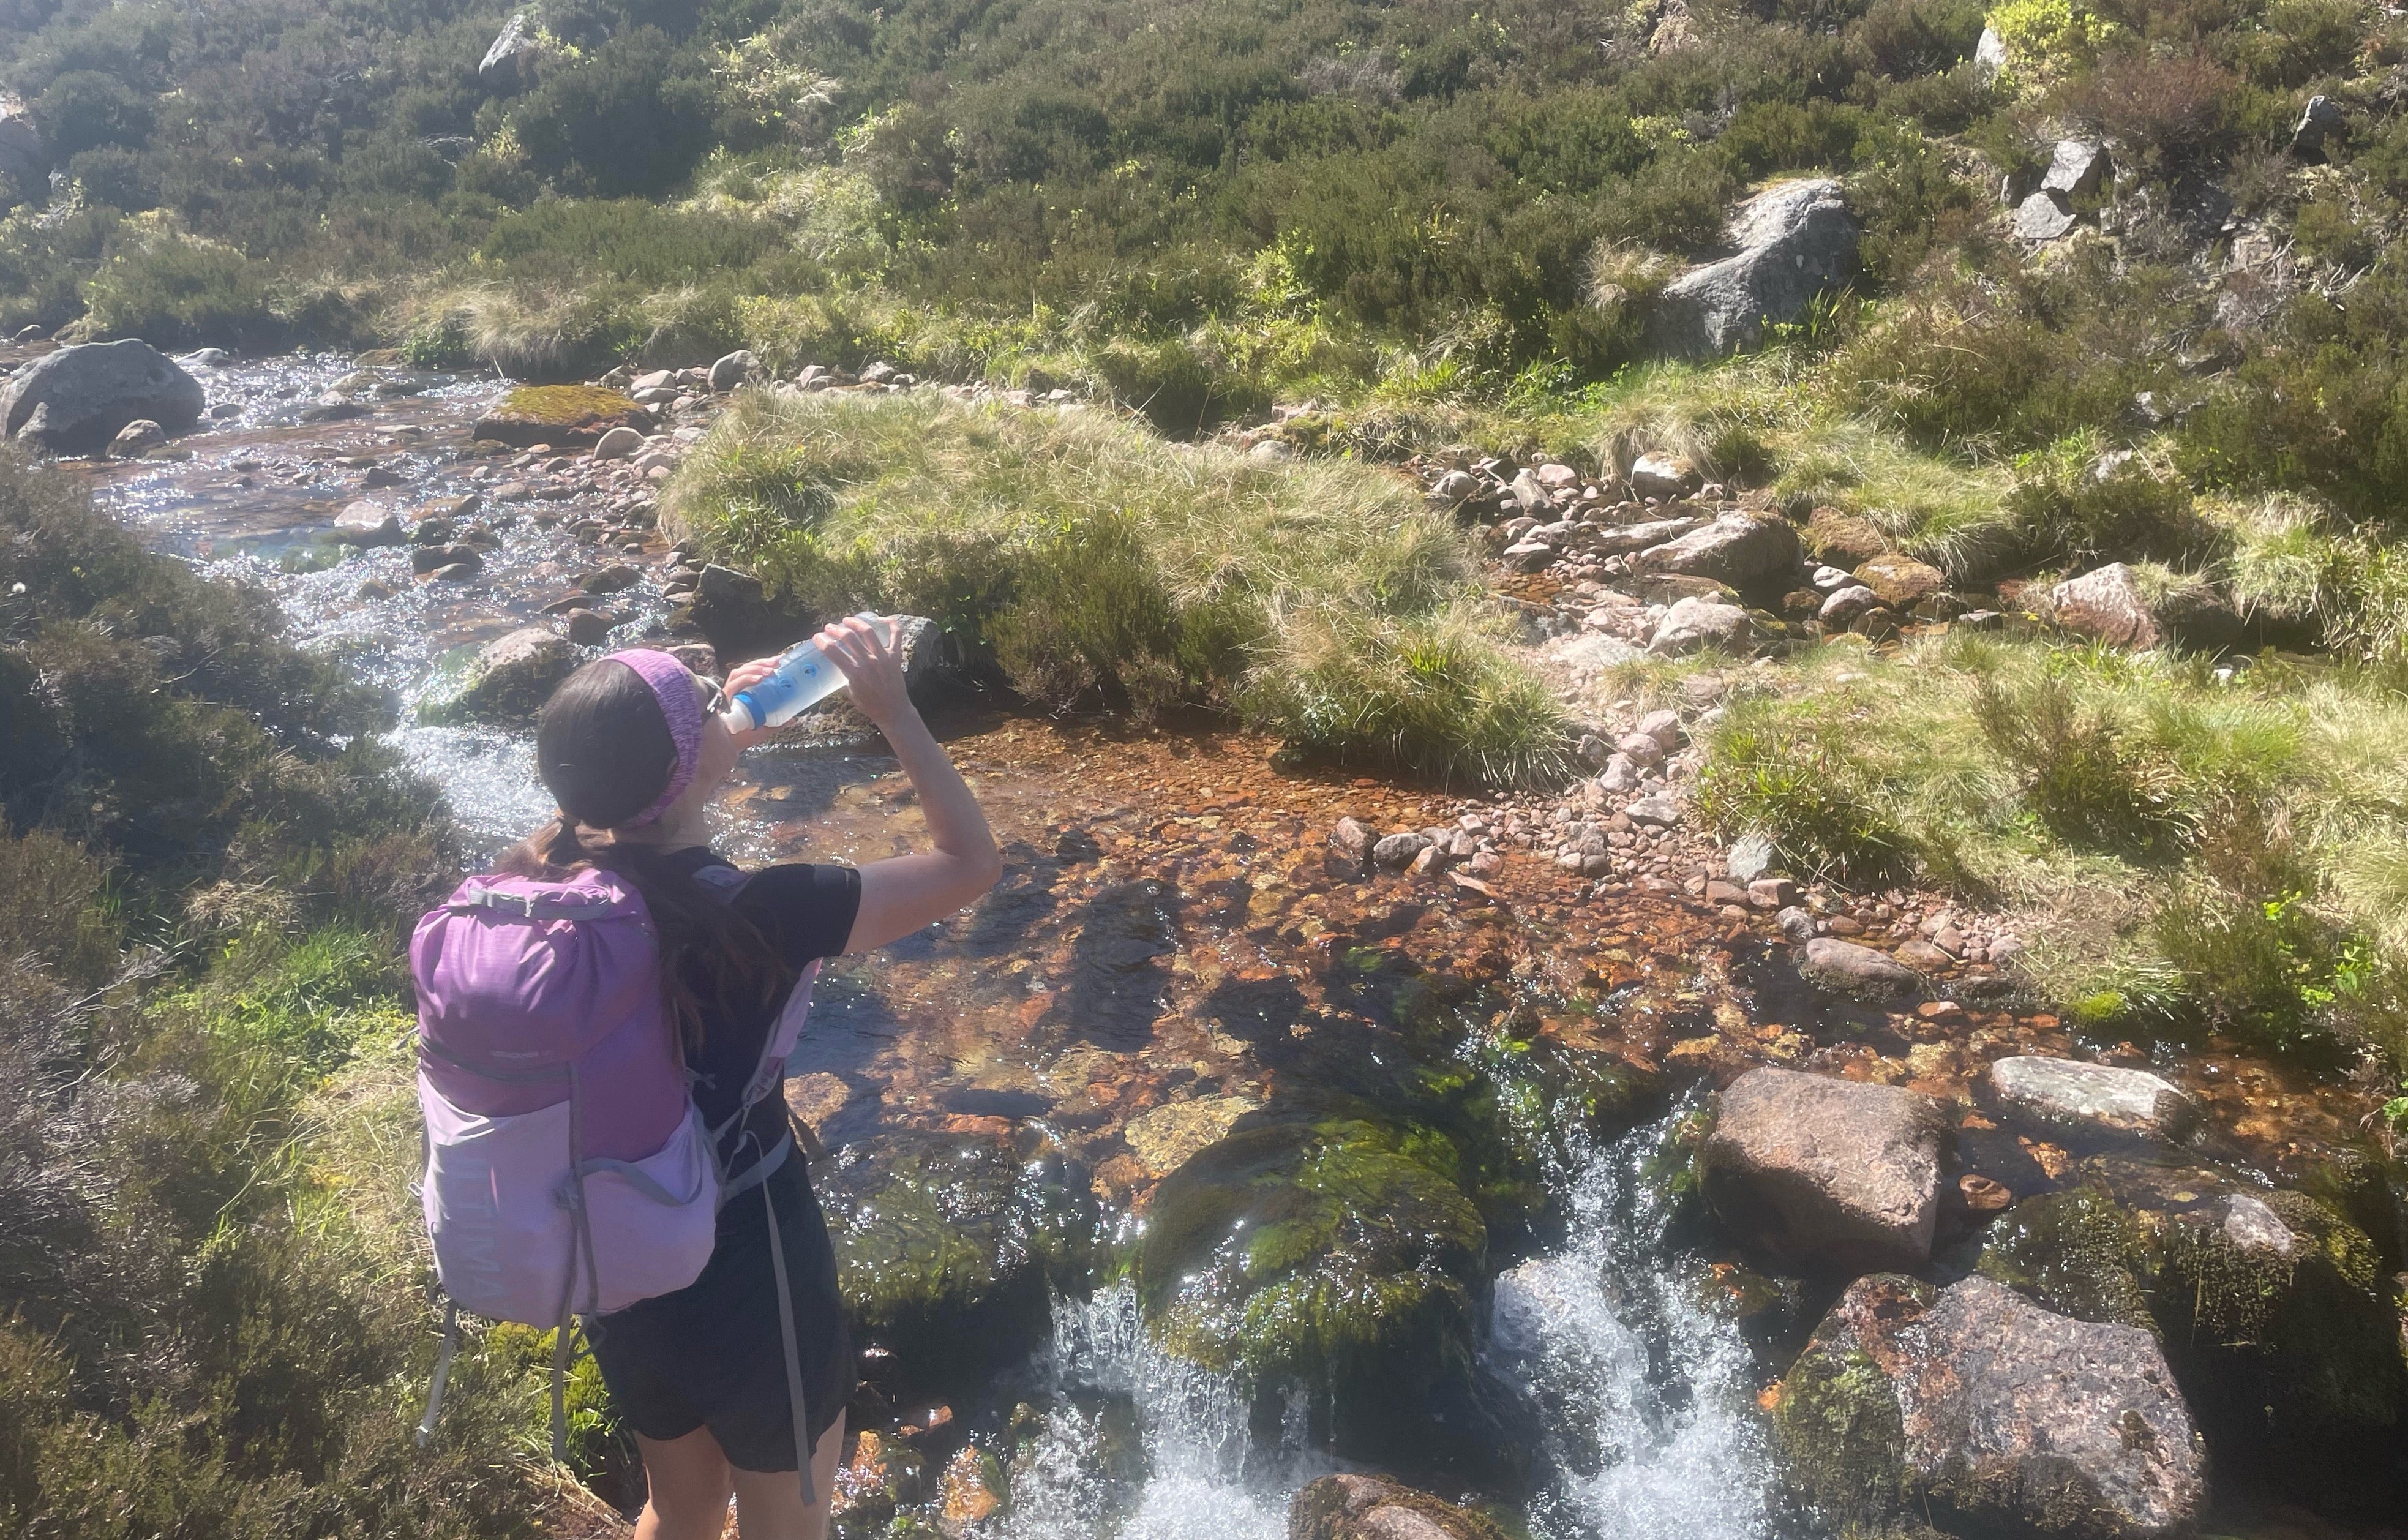 Katie palmer drinking water from a mountain stream. Its crystal clear